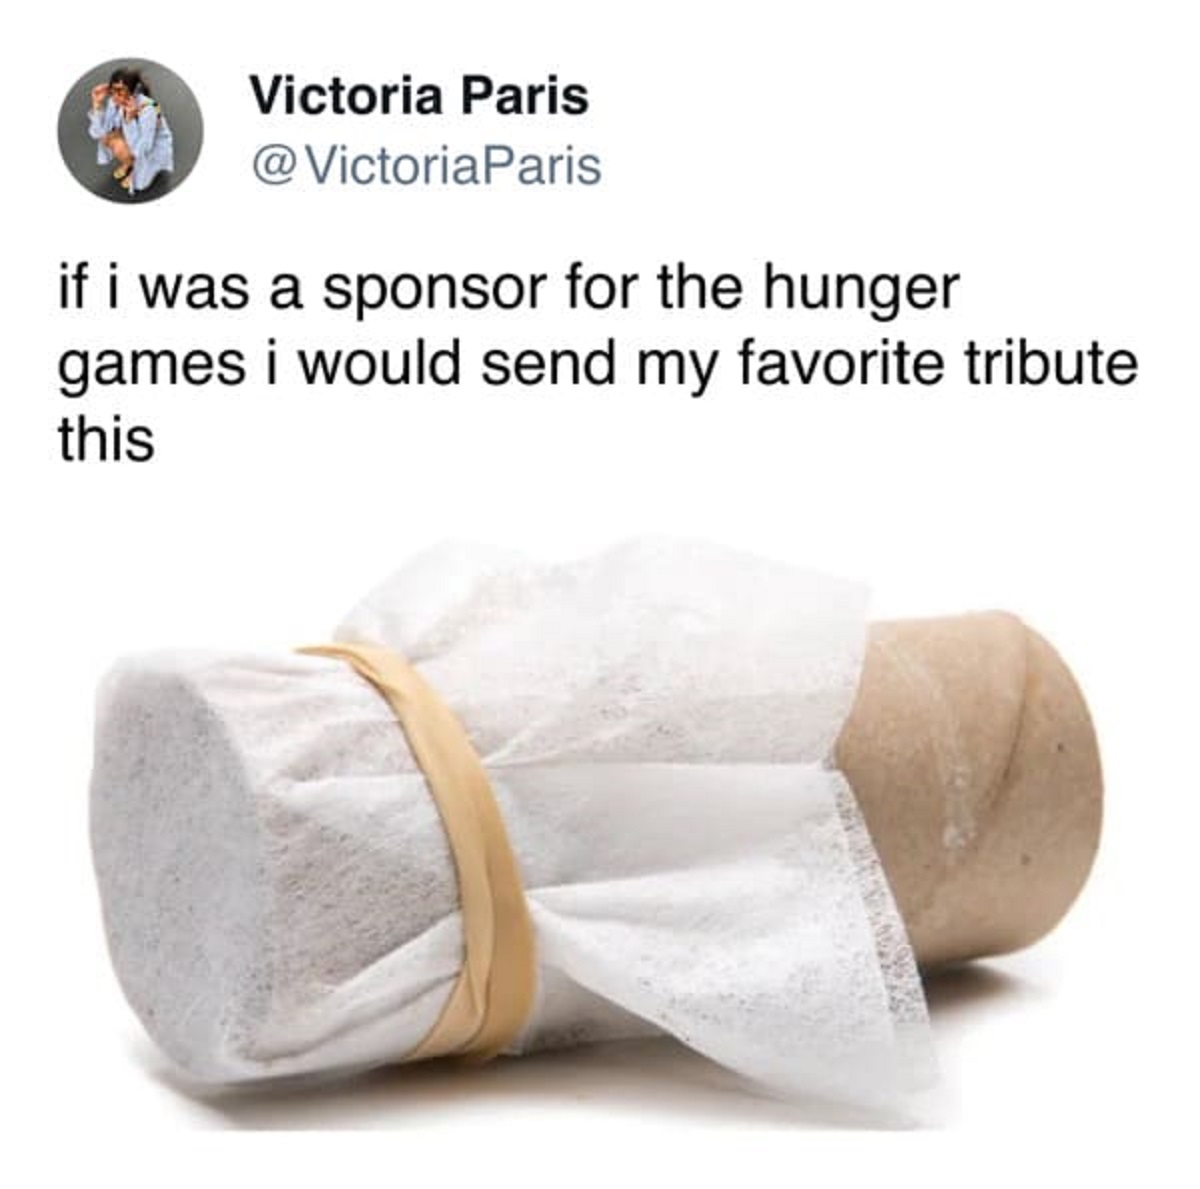 Twitter Highlights: 34 Funny Tweets From Twitter This Week